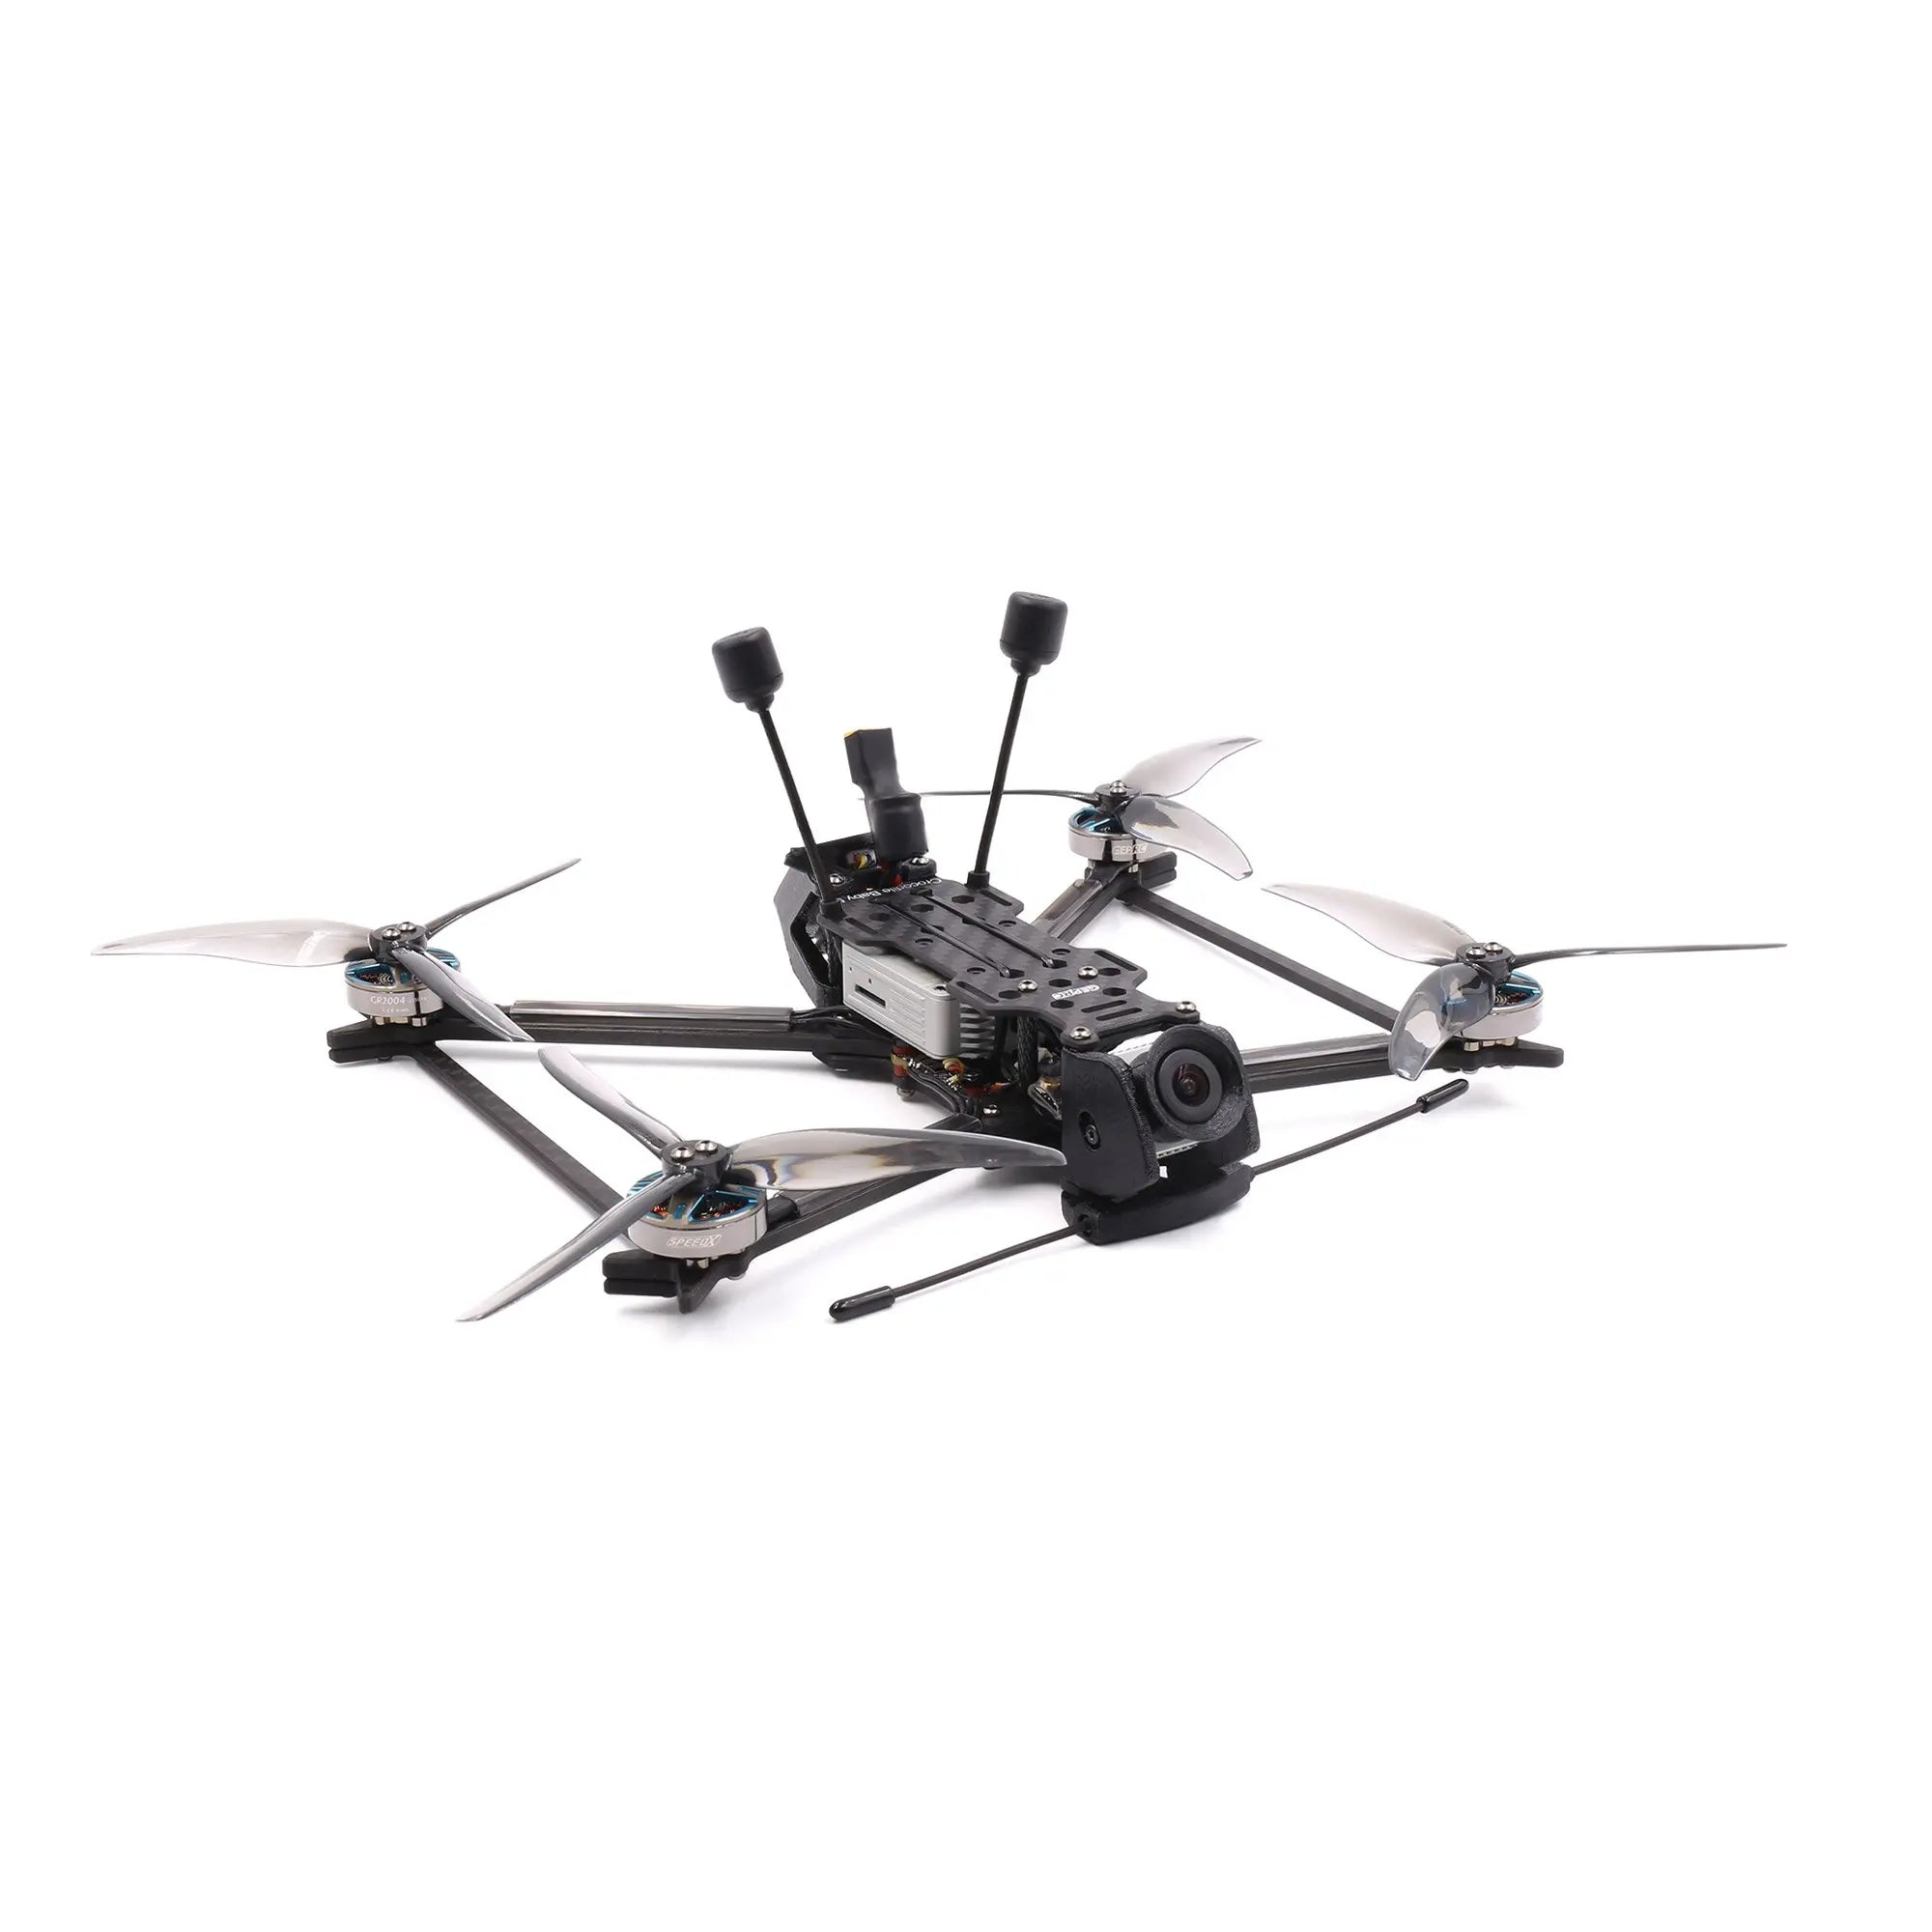 GEPRC Crocodile5 Baby FPV Drone, Combining with Super GEP-F722-35A AIO FC and DJI HD